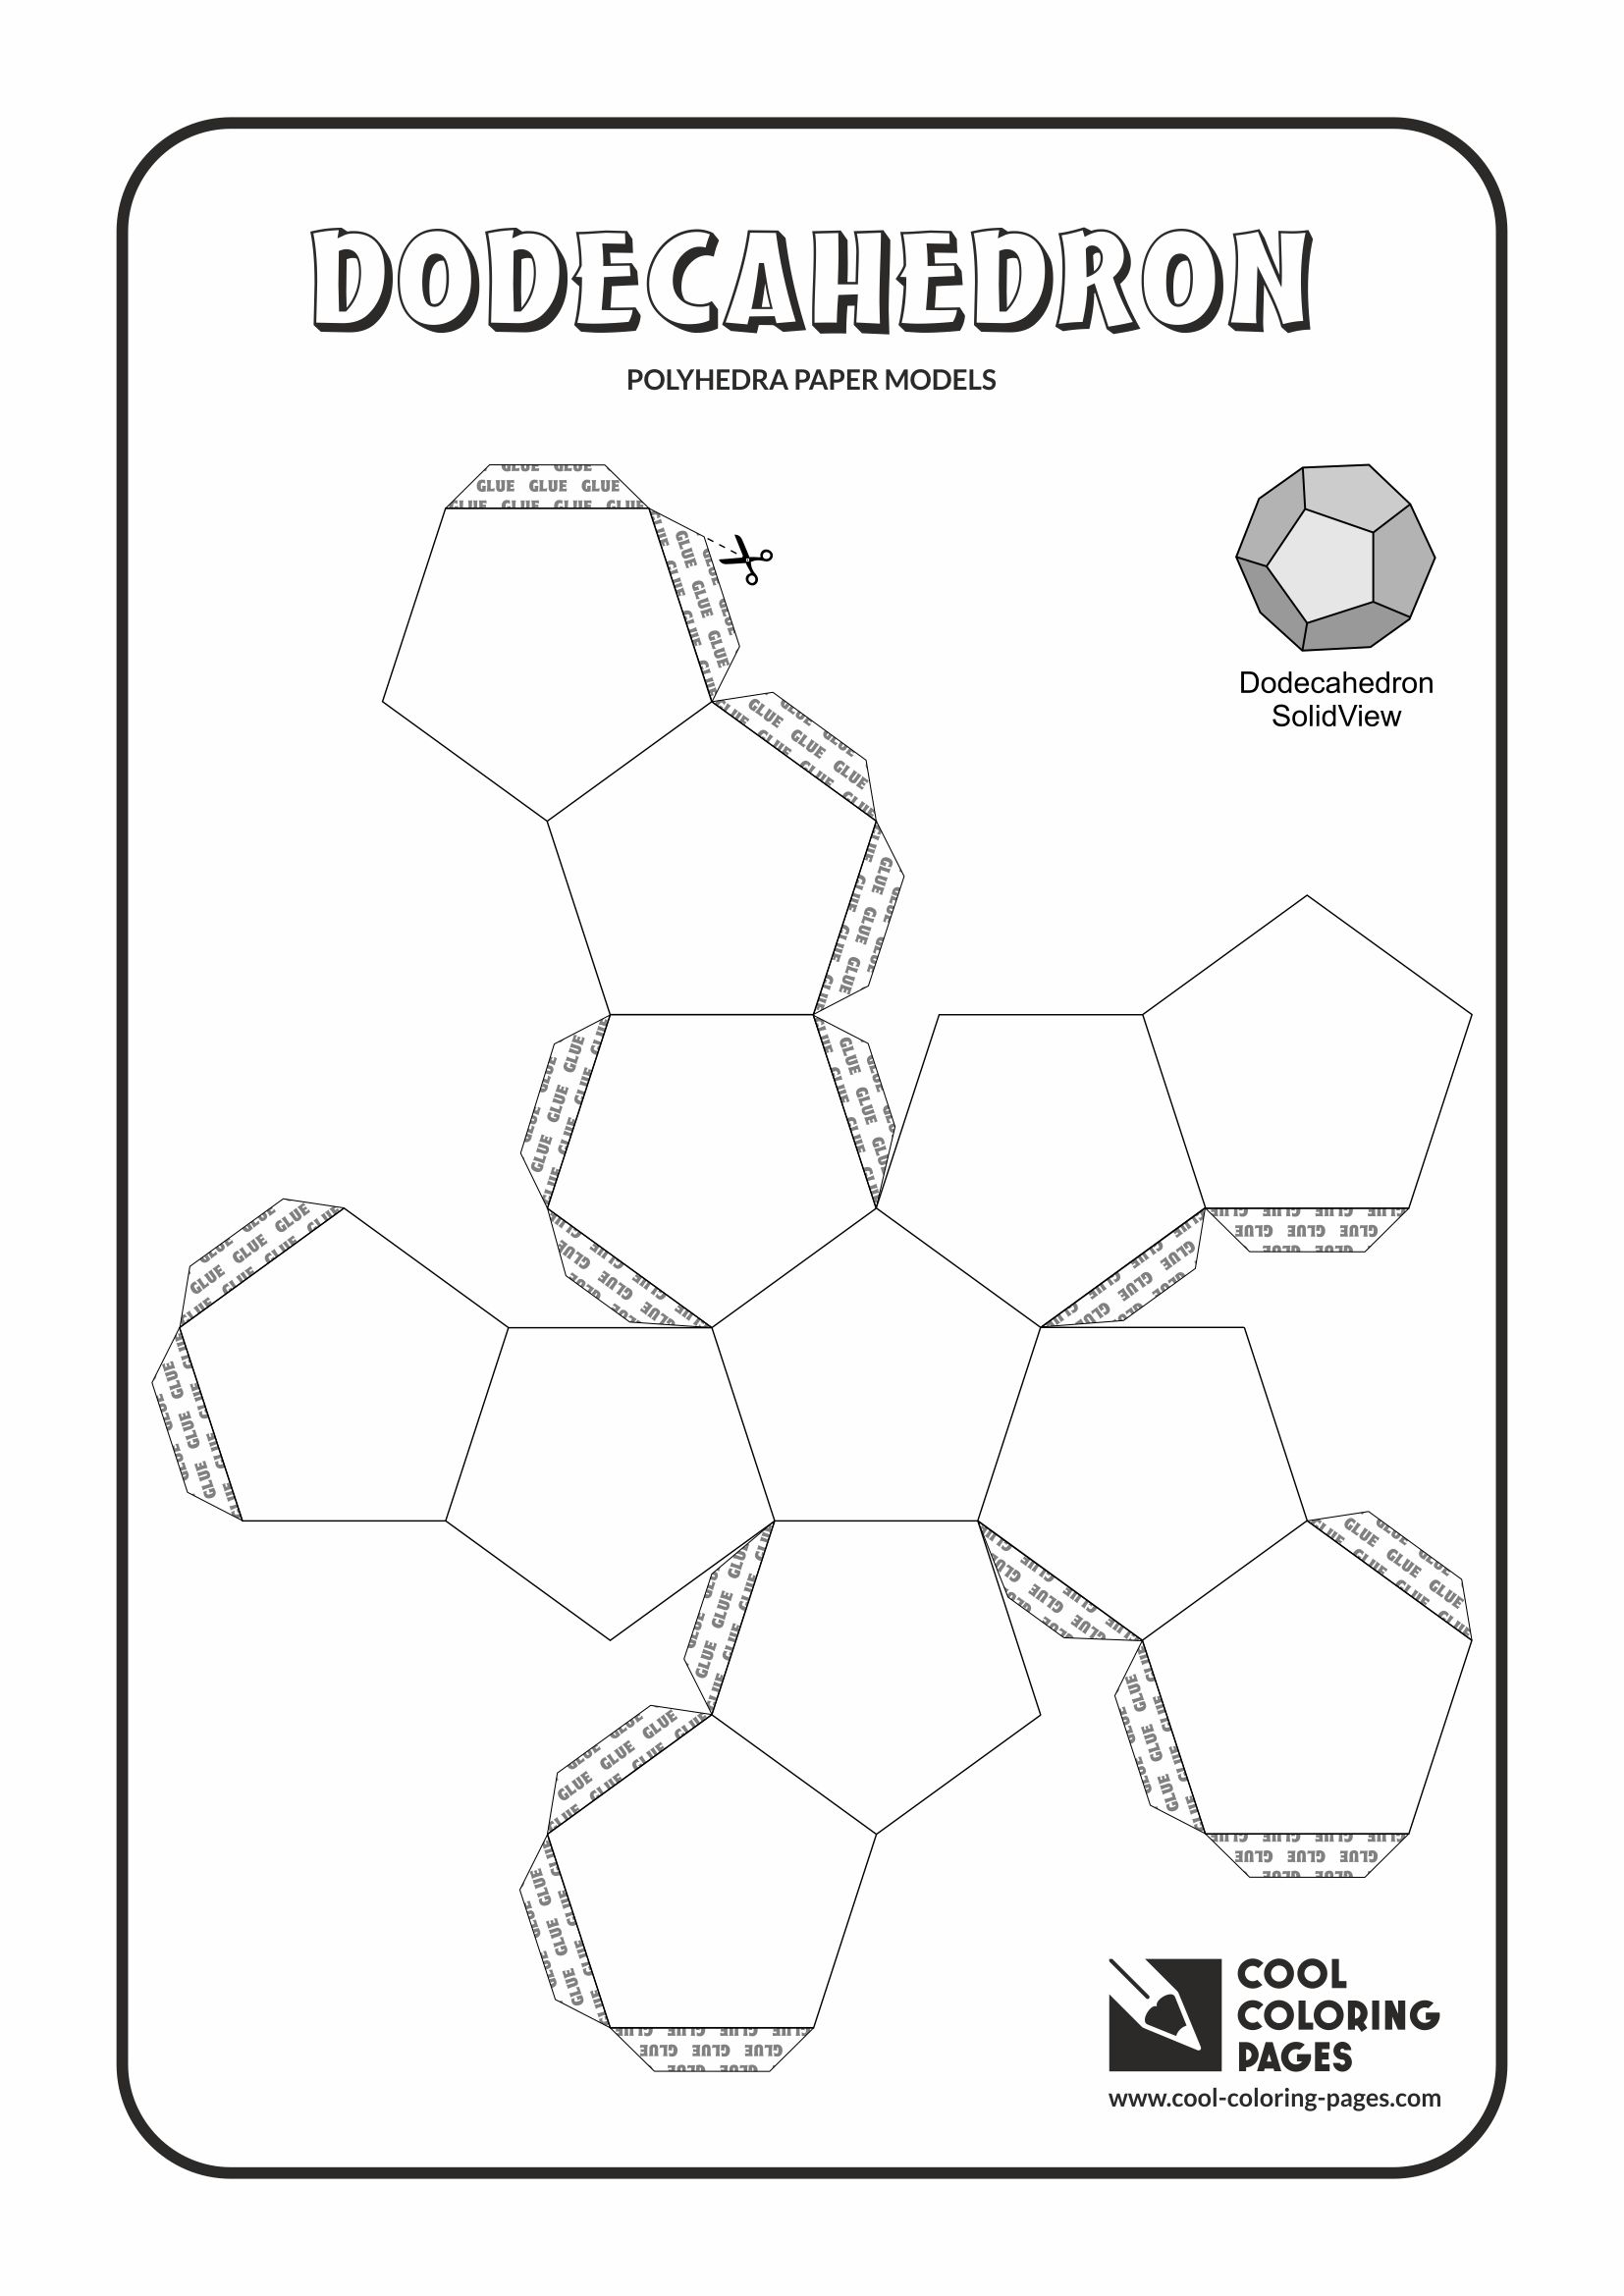 Cool Coloring Pages - Paper models of polyhedra / Paper solids models / Dodecahedron